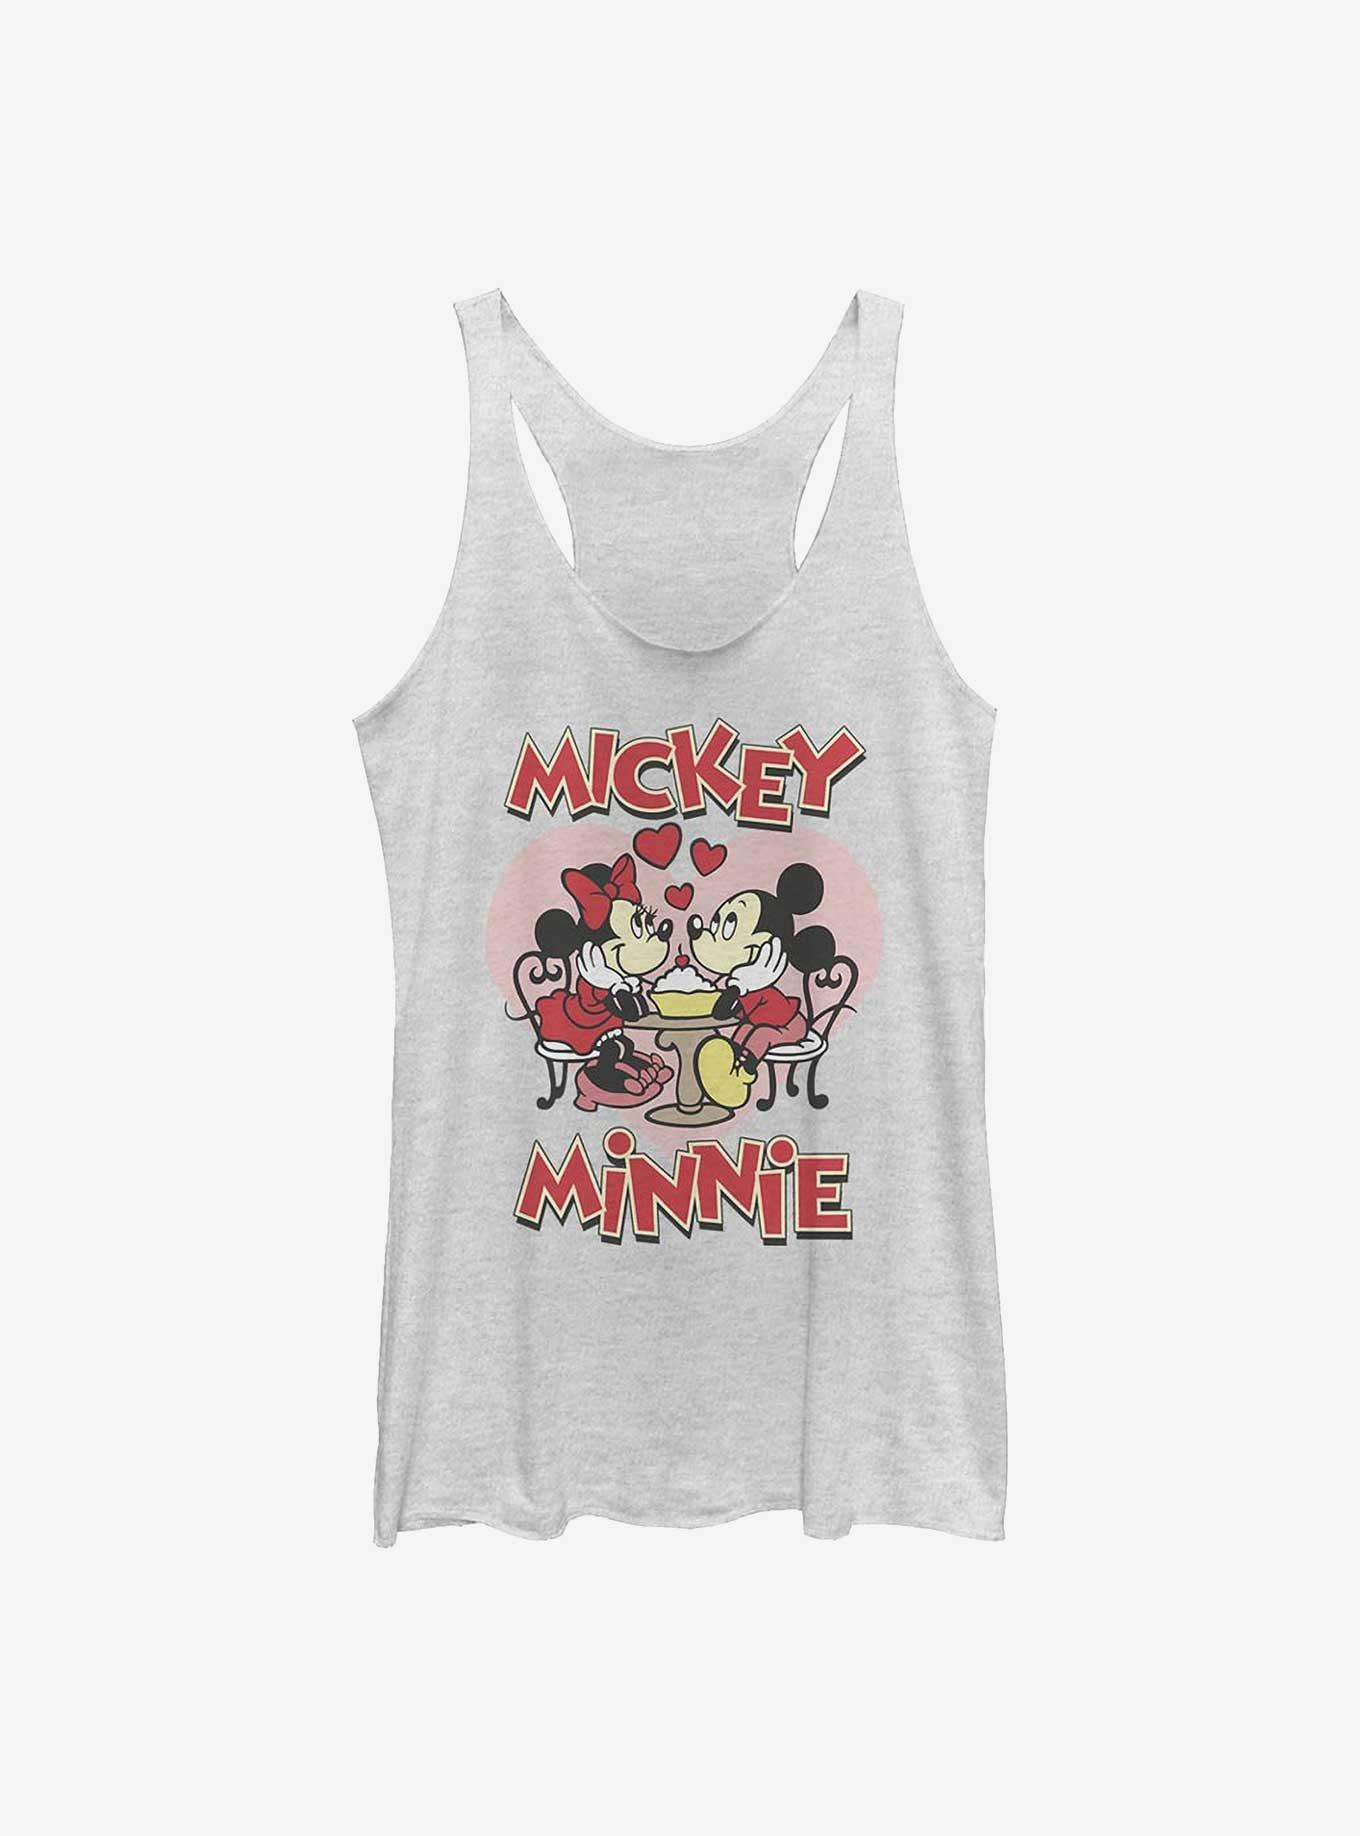 Disney Mickey Mouse & Minnie Mouse Sweet Sundae Girls Tank Top, WHITE HTR, hi-res